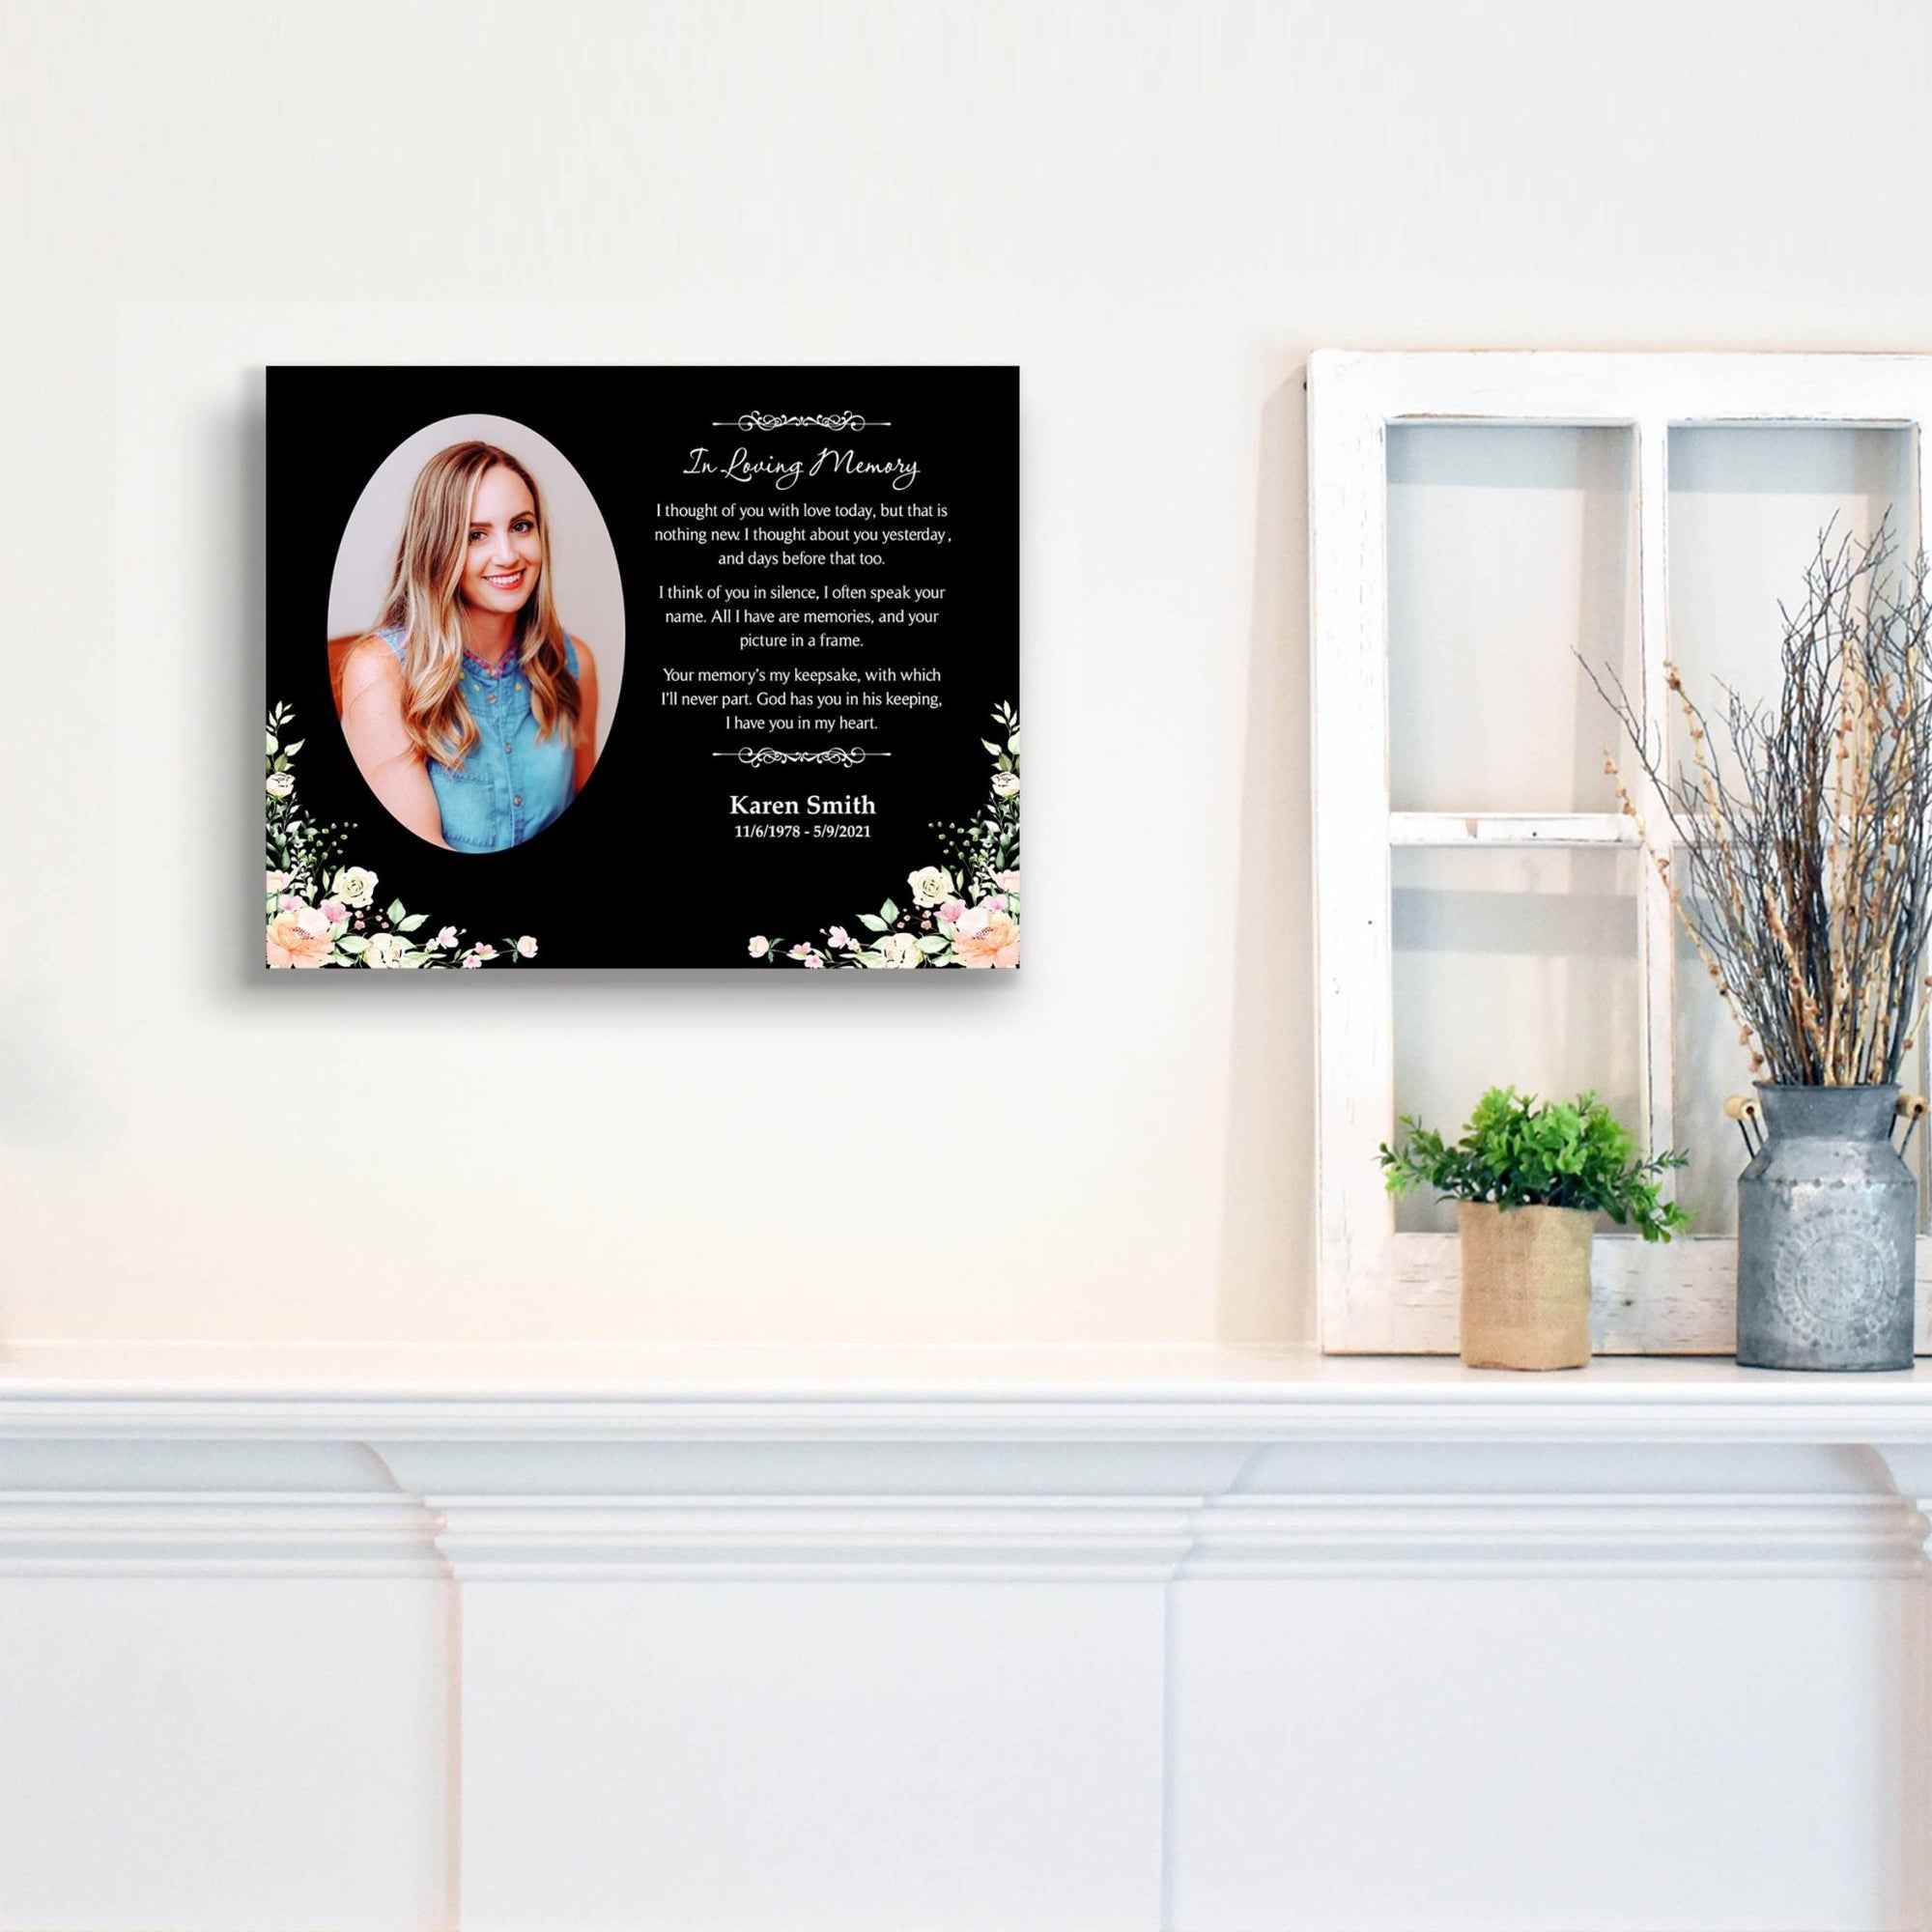 Personalized Human Memorial Black Photo & Inspirational Verse Bereavement Wall Décor & Sympathy Gift Ideas - In loving Memory - LifeSong Milestones